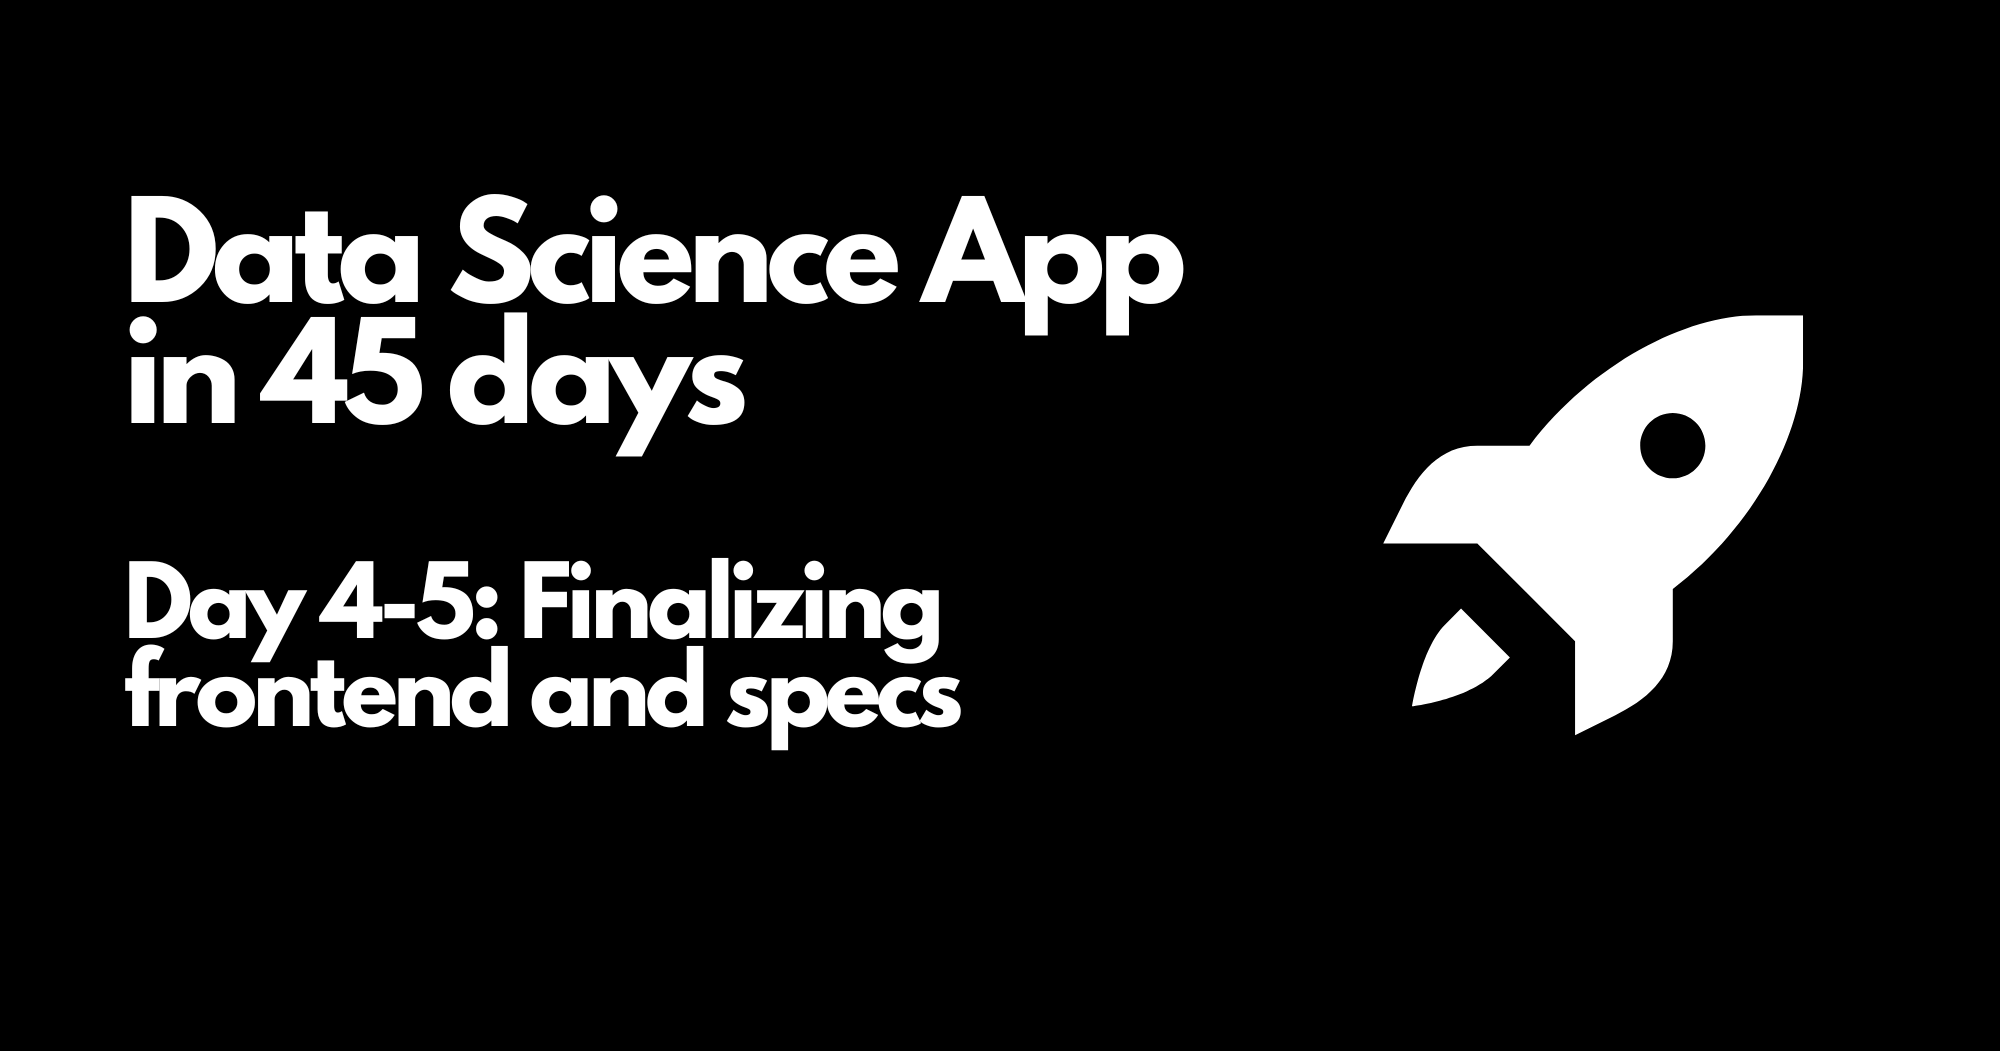 Day 4-5 - Data Science App in 45 days - Finalizing frontend and specs